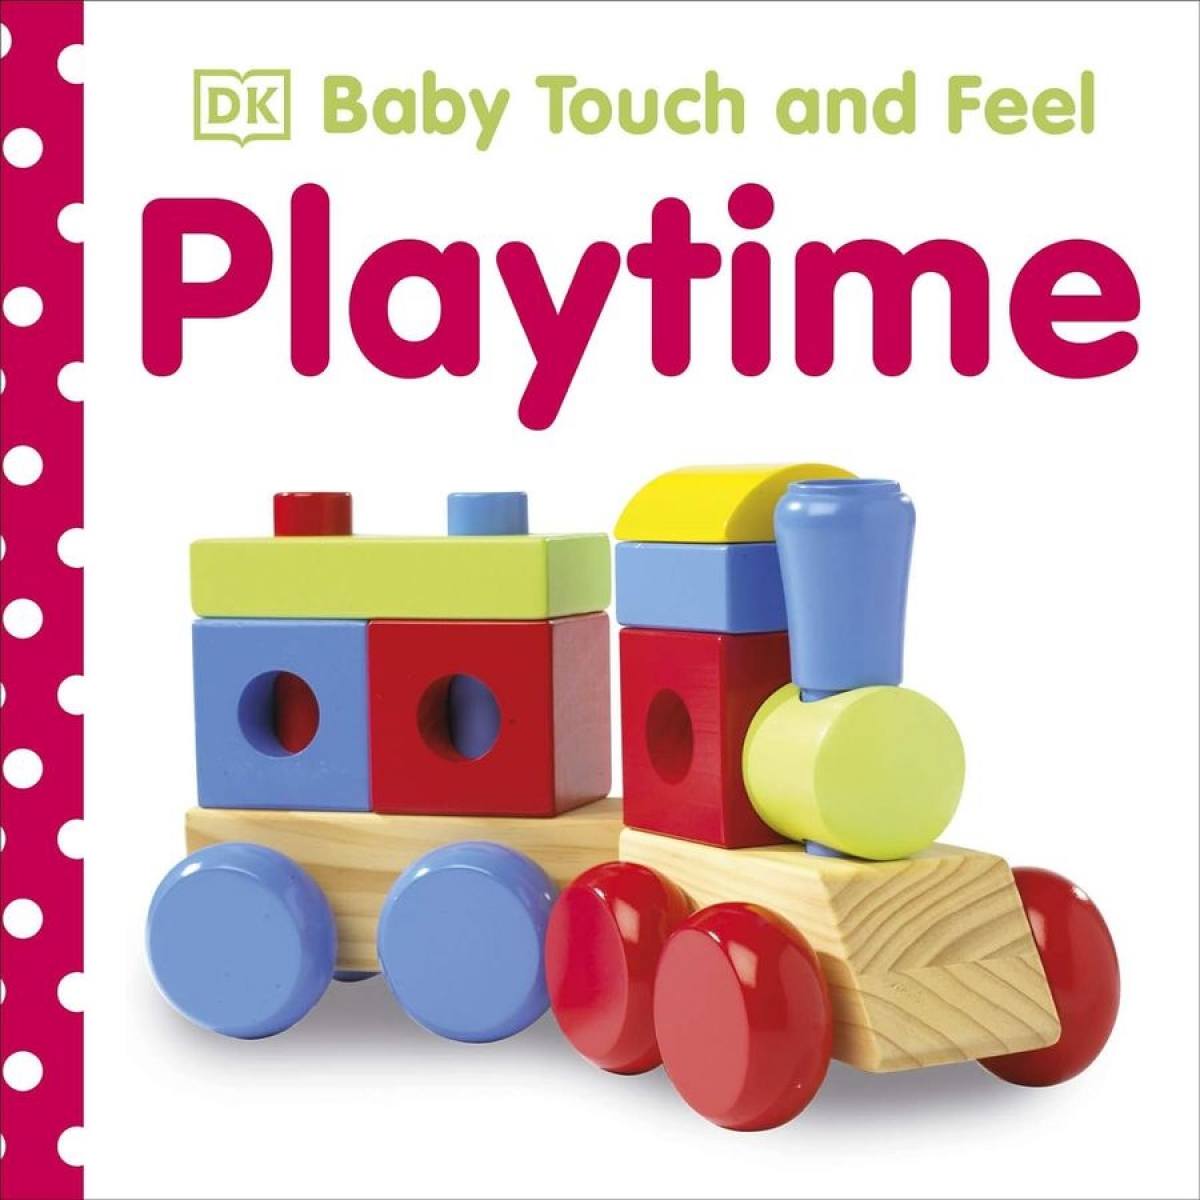 Dorling K. Baby Touch and Feel Playtime 